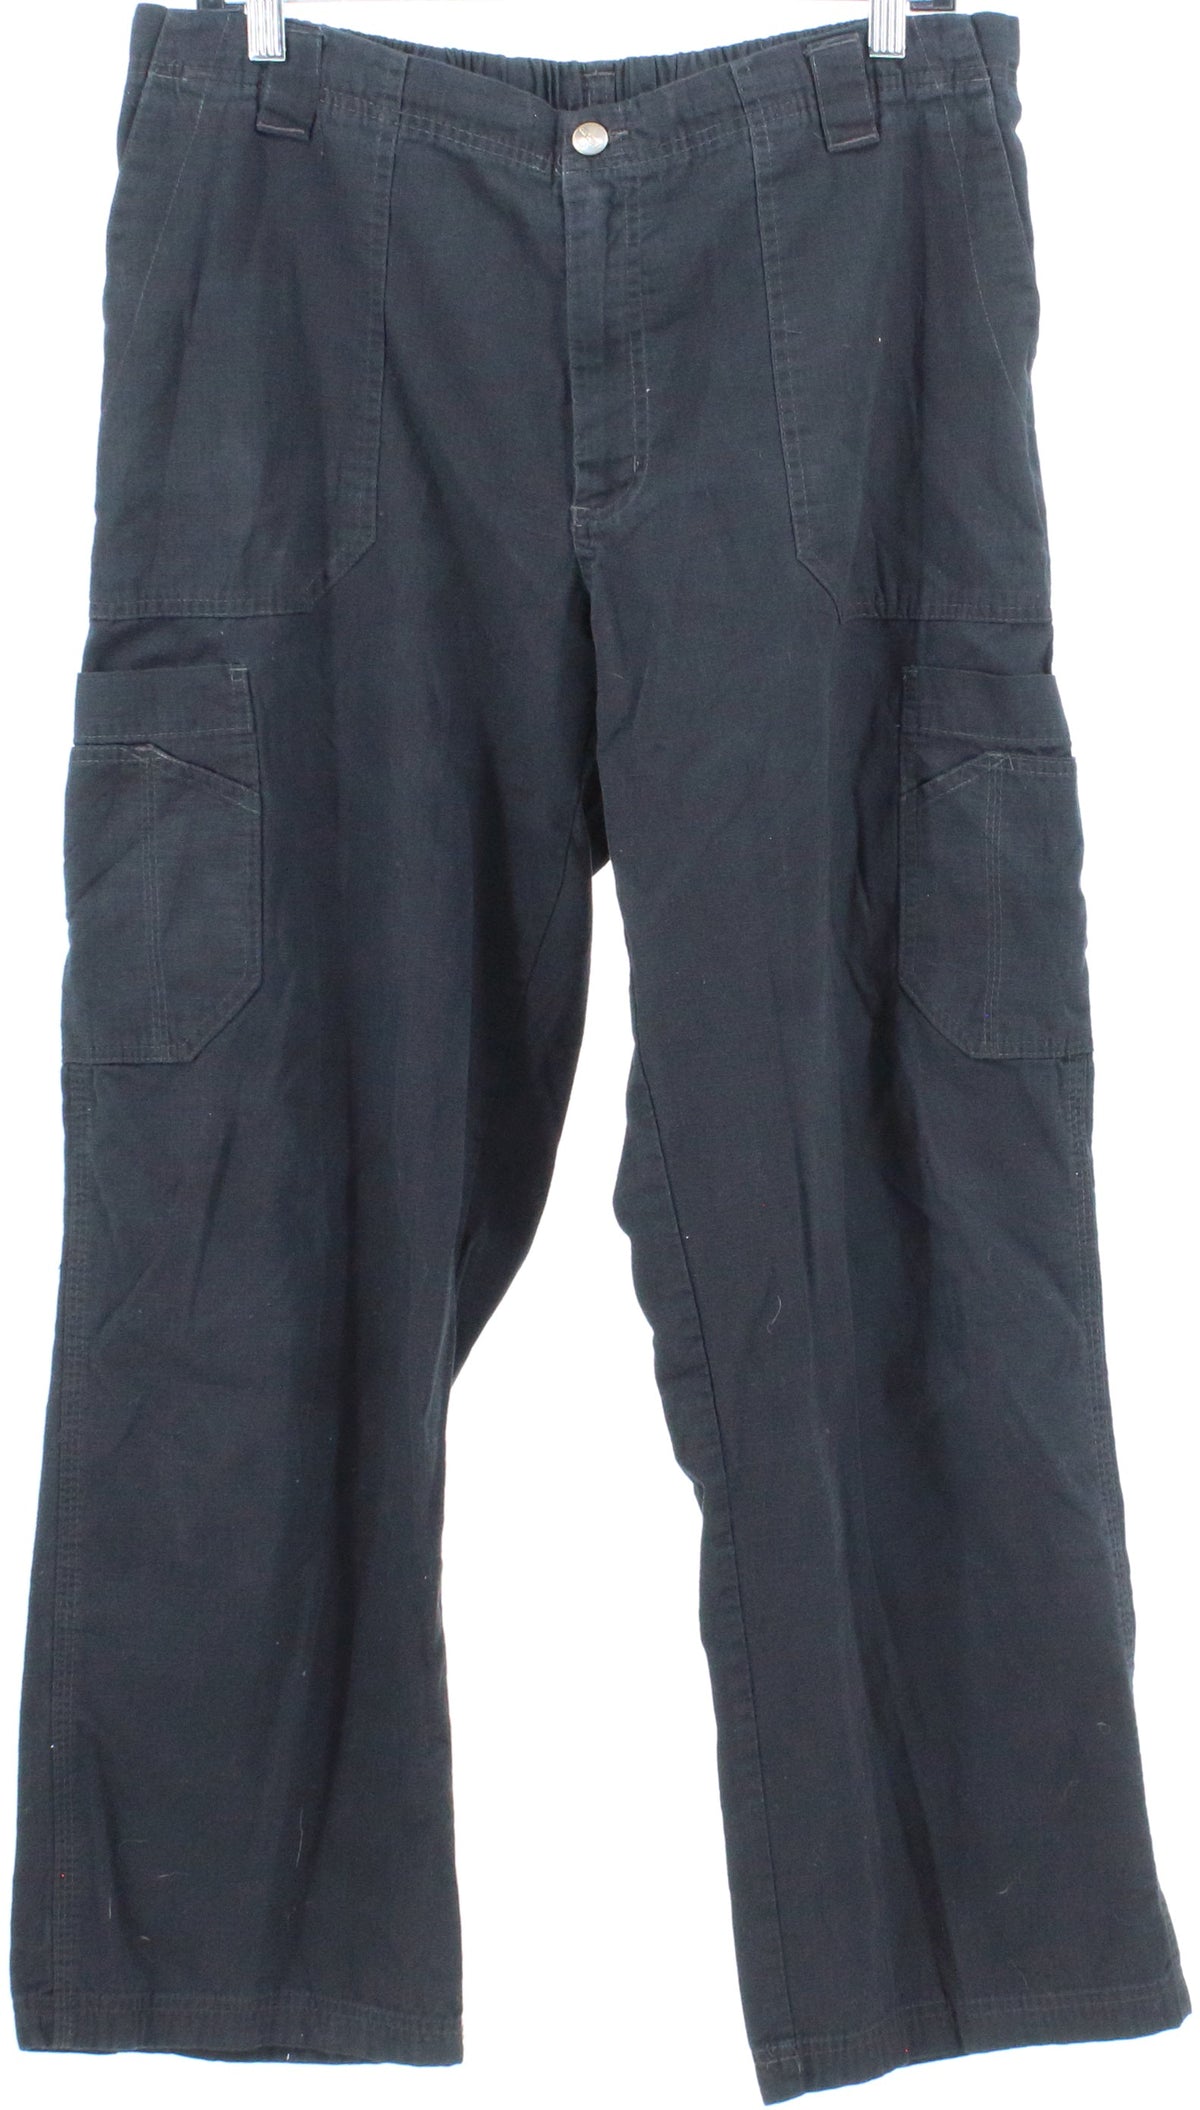 Carhartt Black Cargo Pants With Elastic On The Back